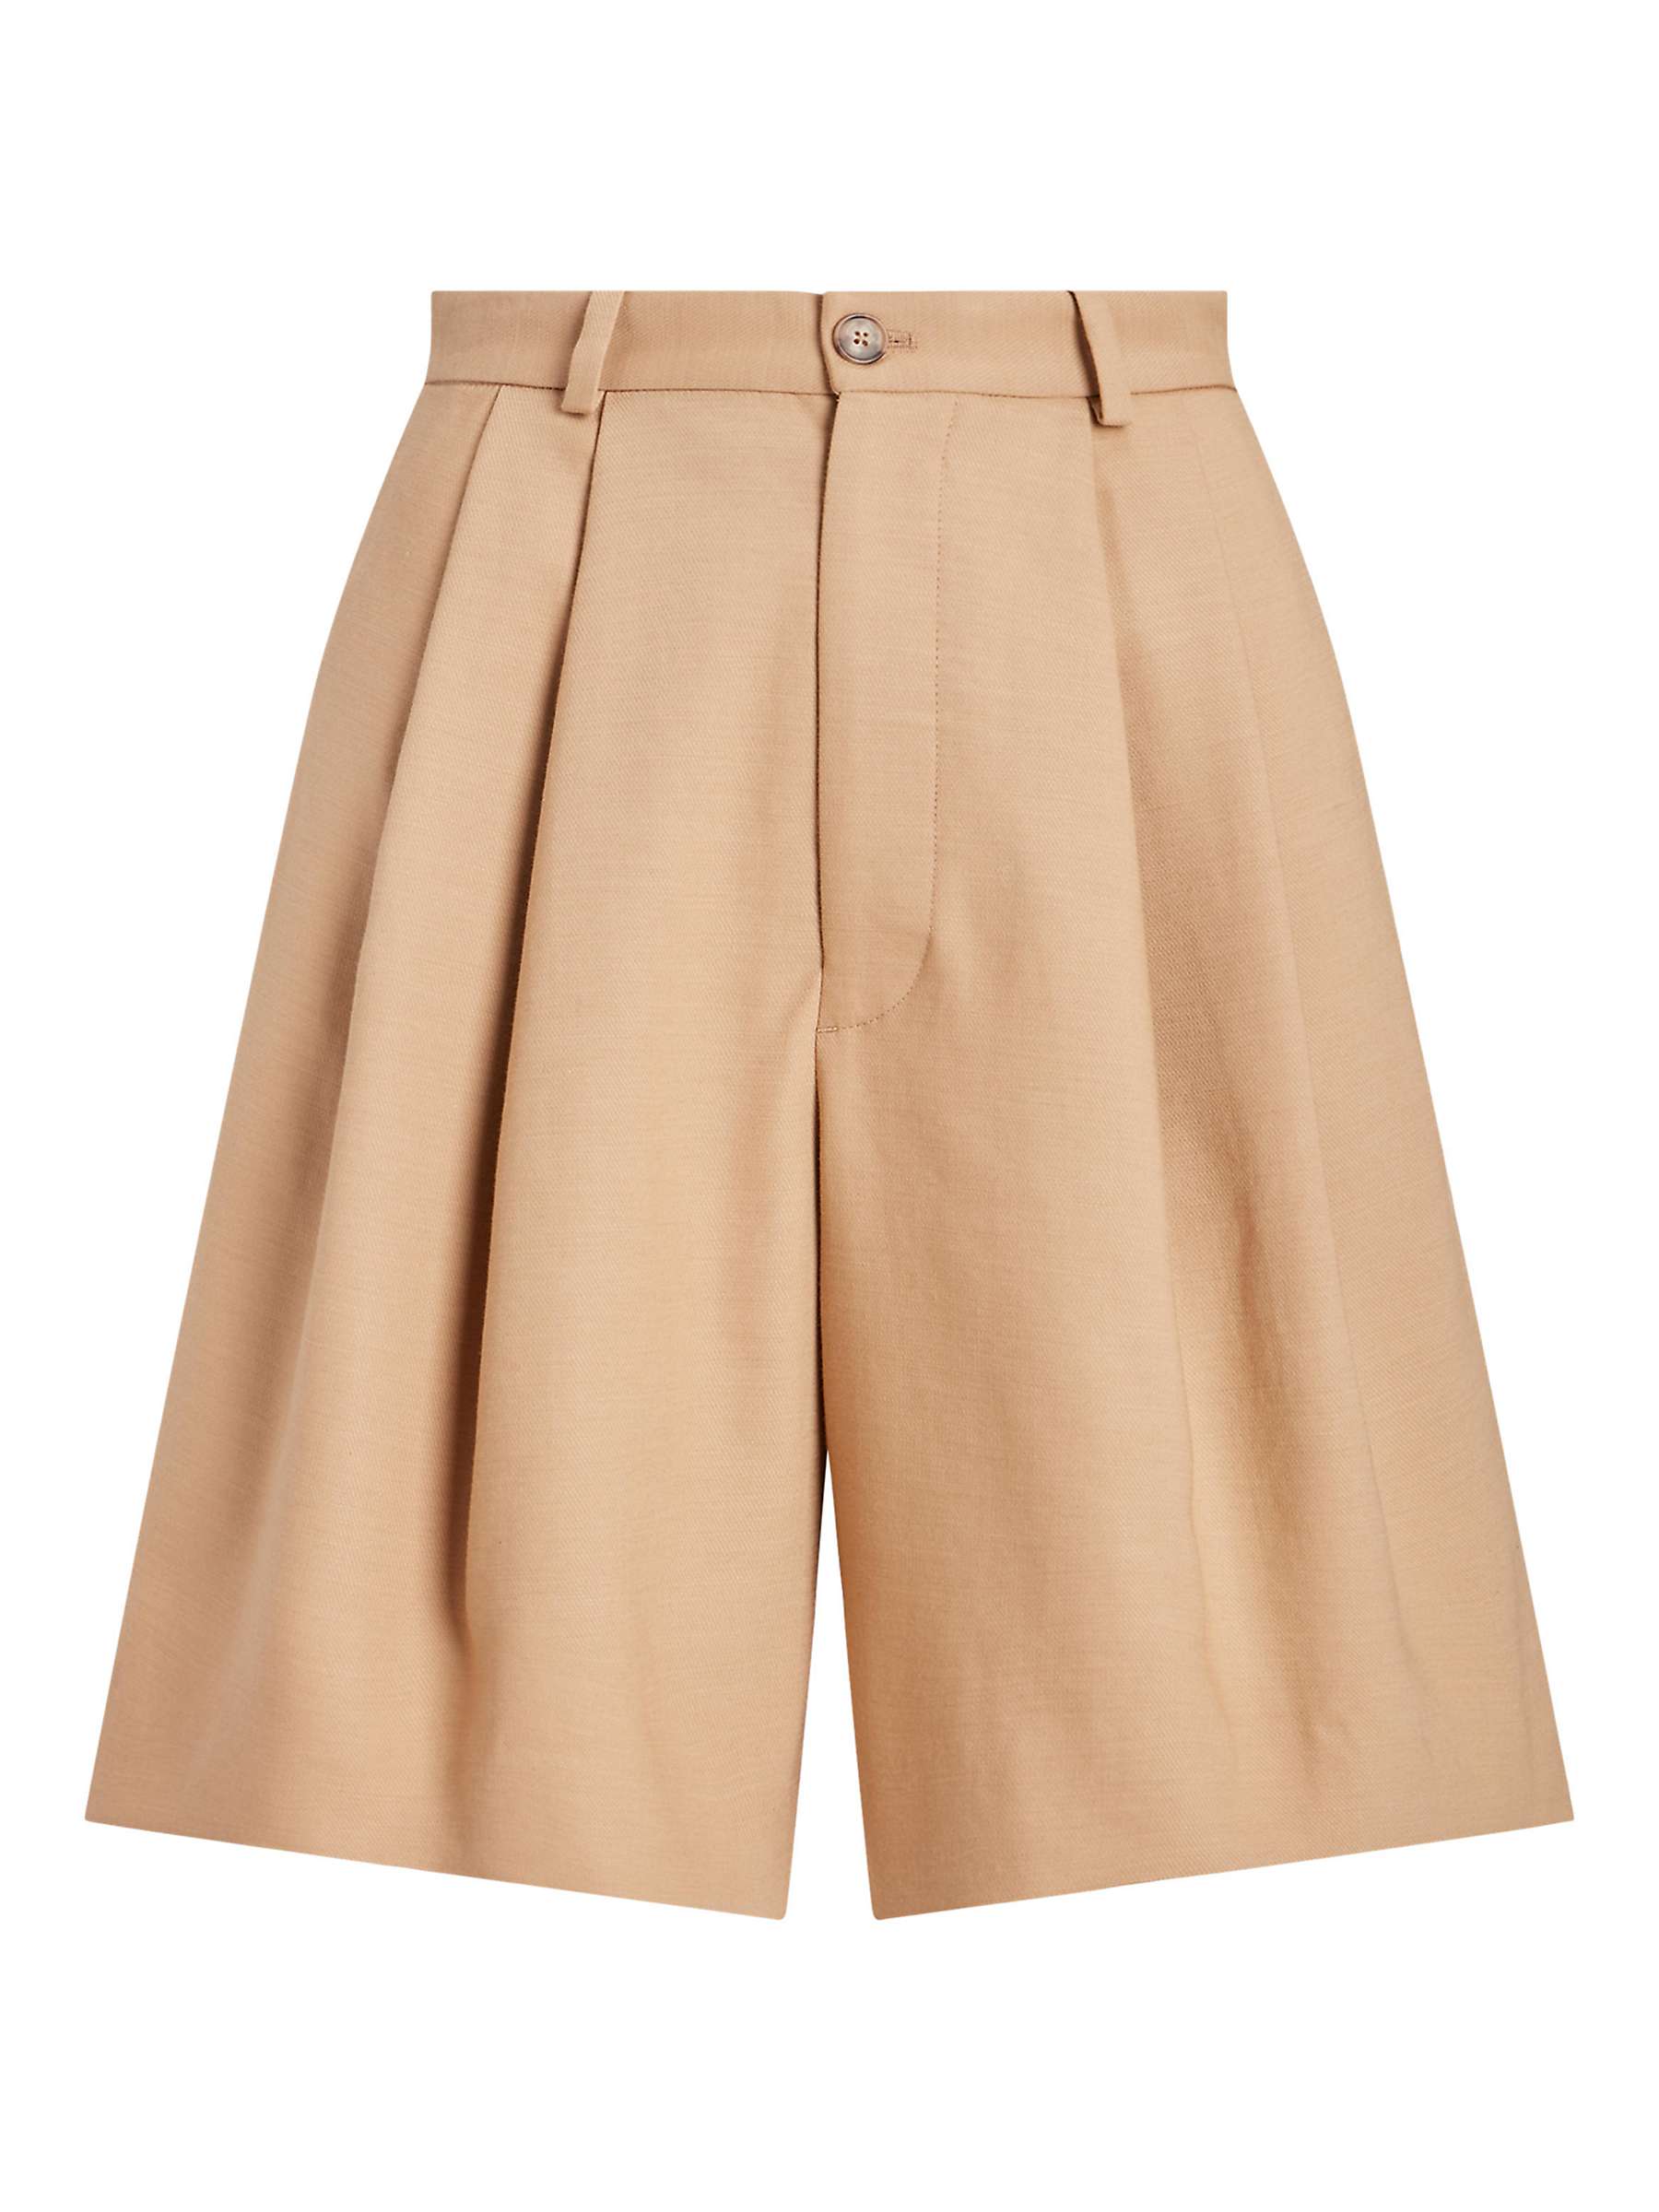 Buy Polo Ralph Lauren Pleated Shorts, Tan Online at johnlewis.com